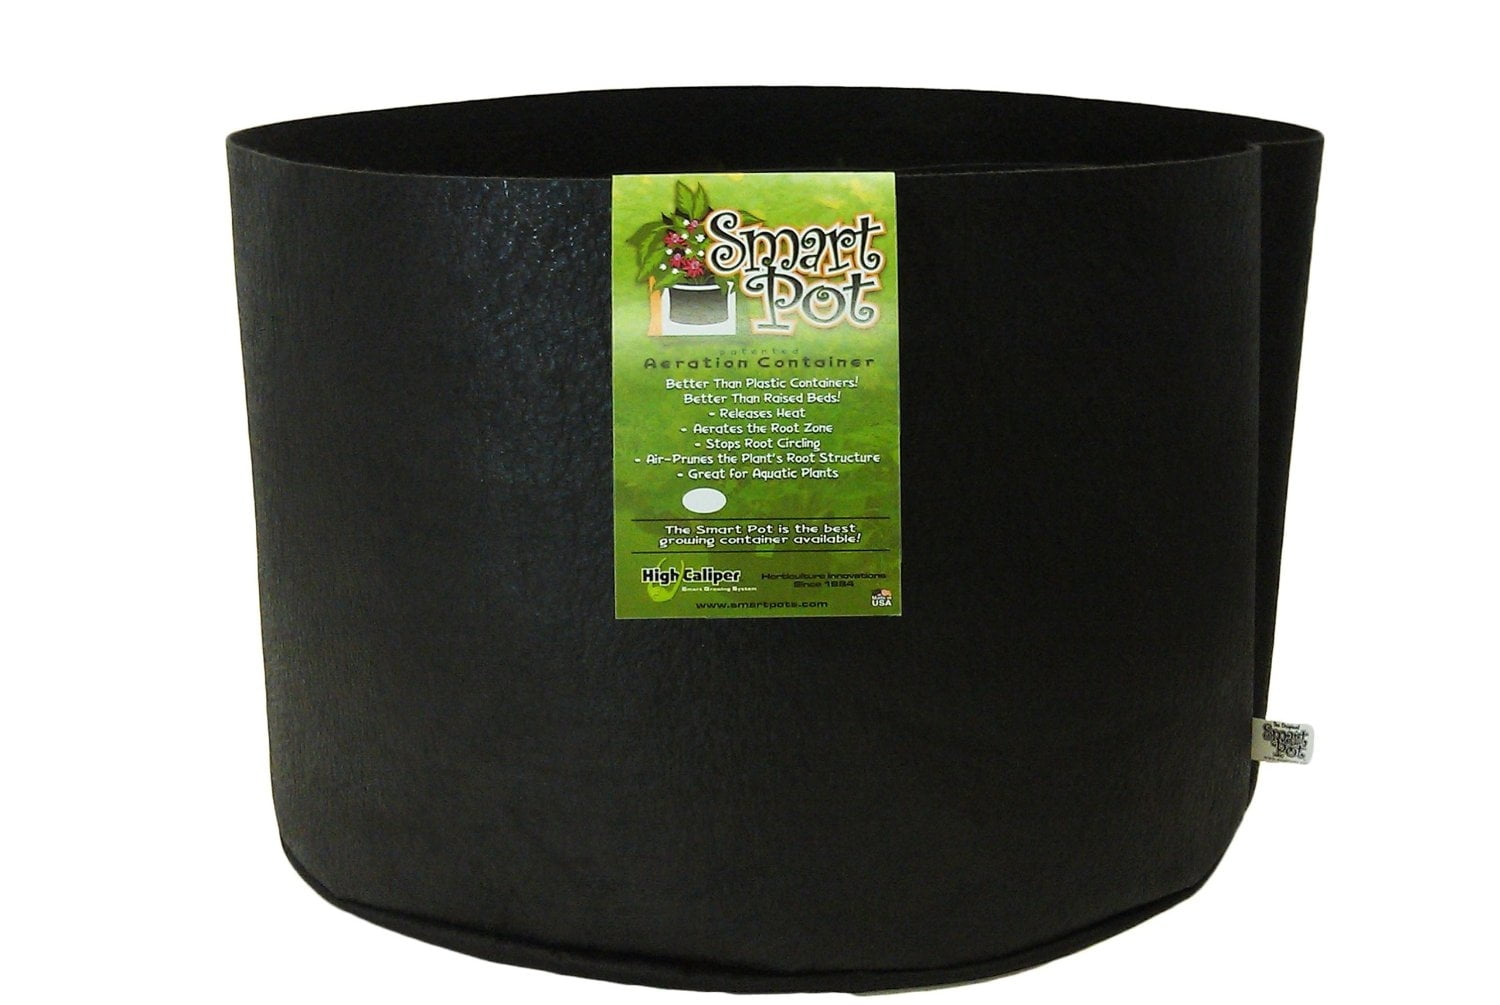 Black Fabric/Soft Sided Garden Aeration Container 5 Pots Smart Pot 3 Gallon 